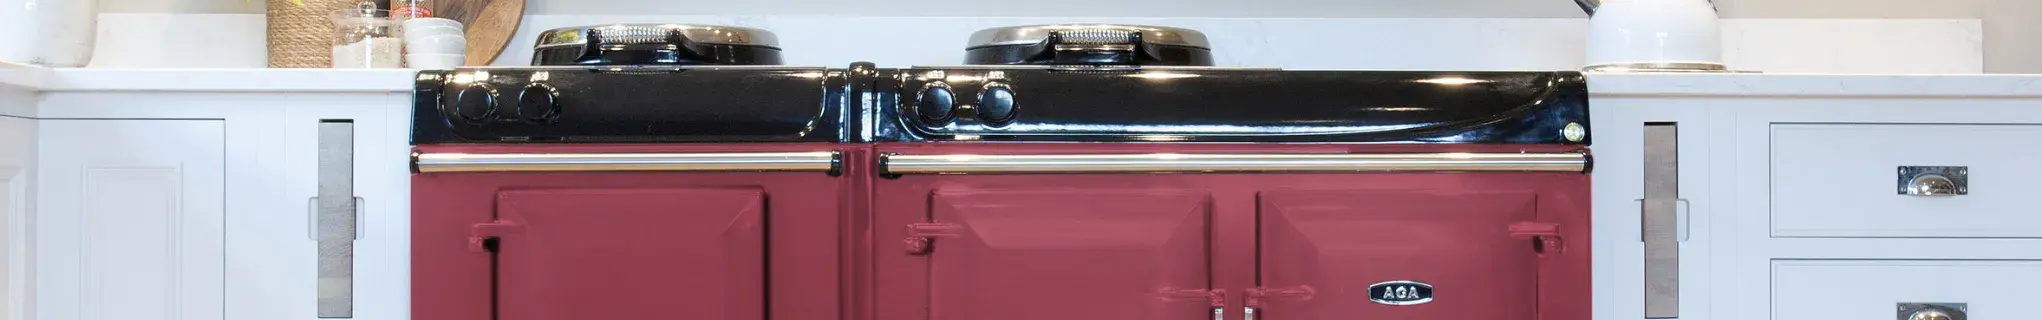 AGA Raspberry Cooker with white cupboards